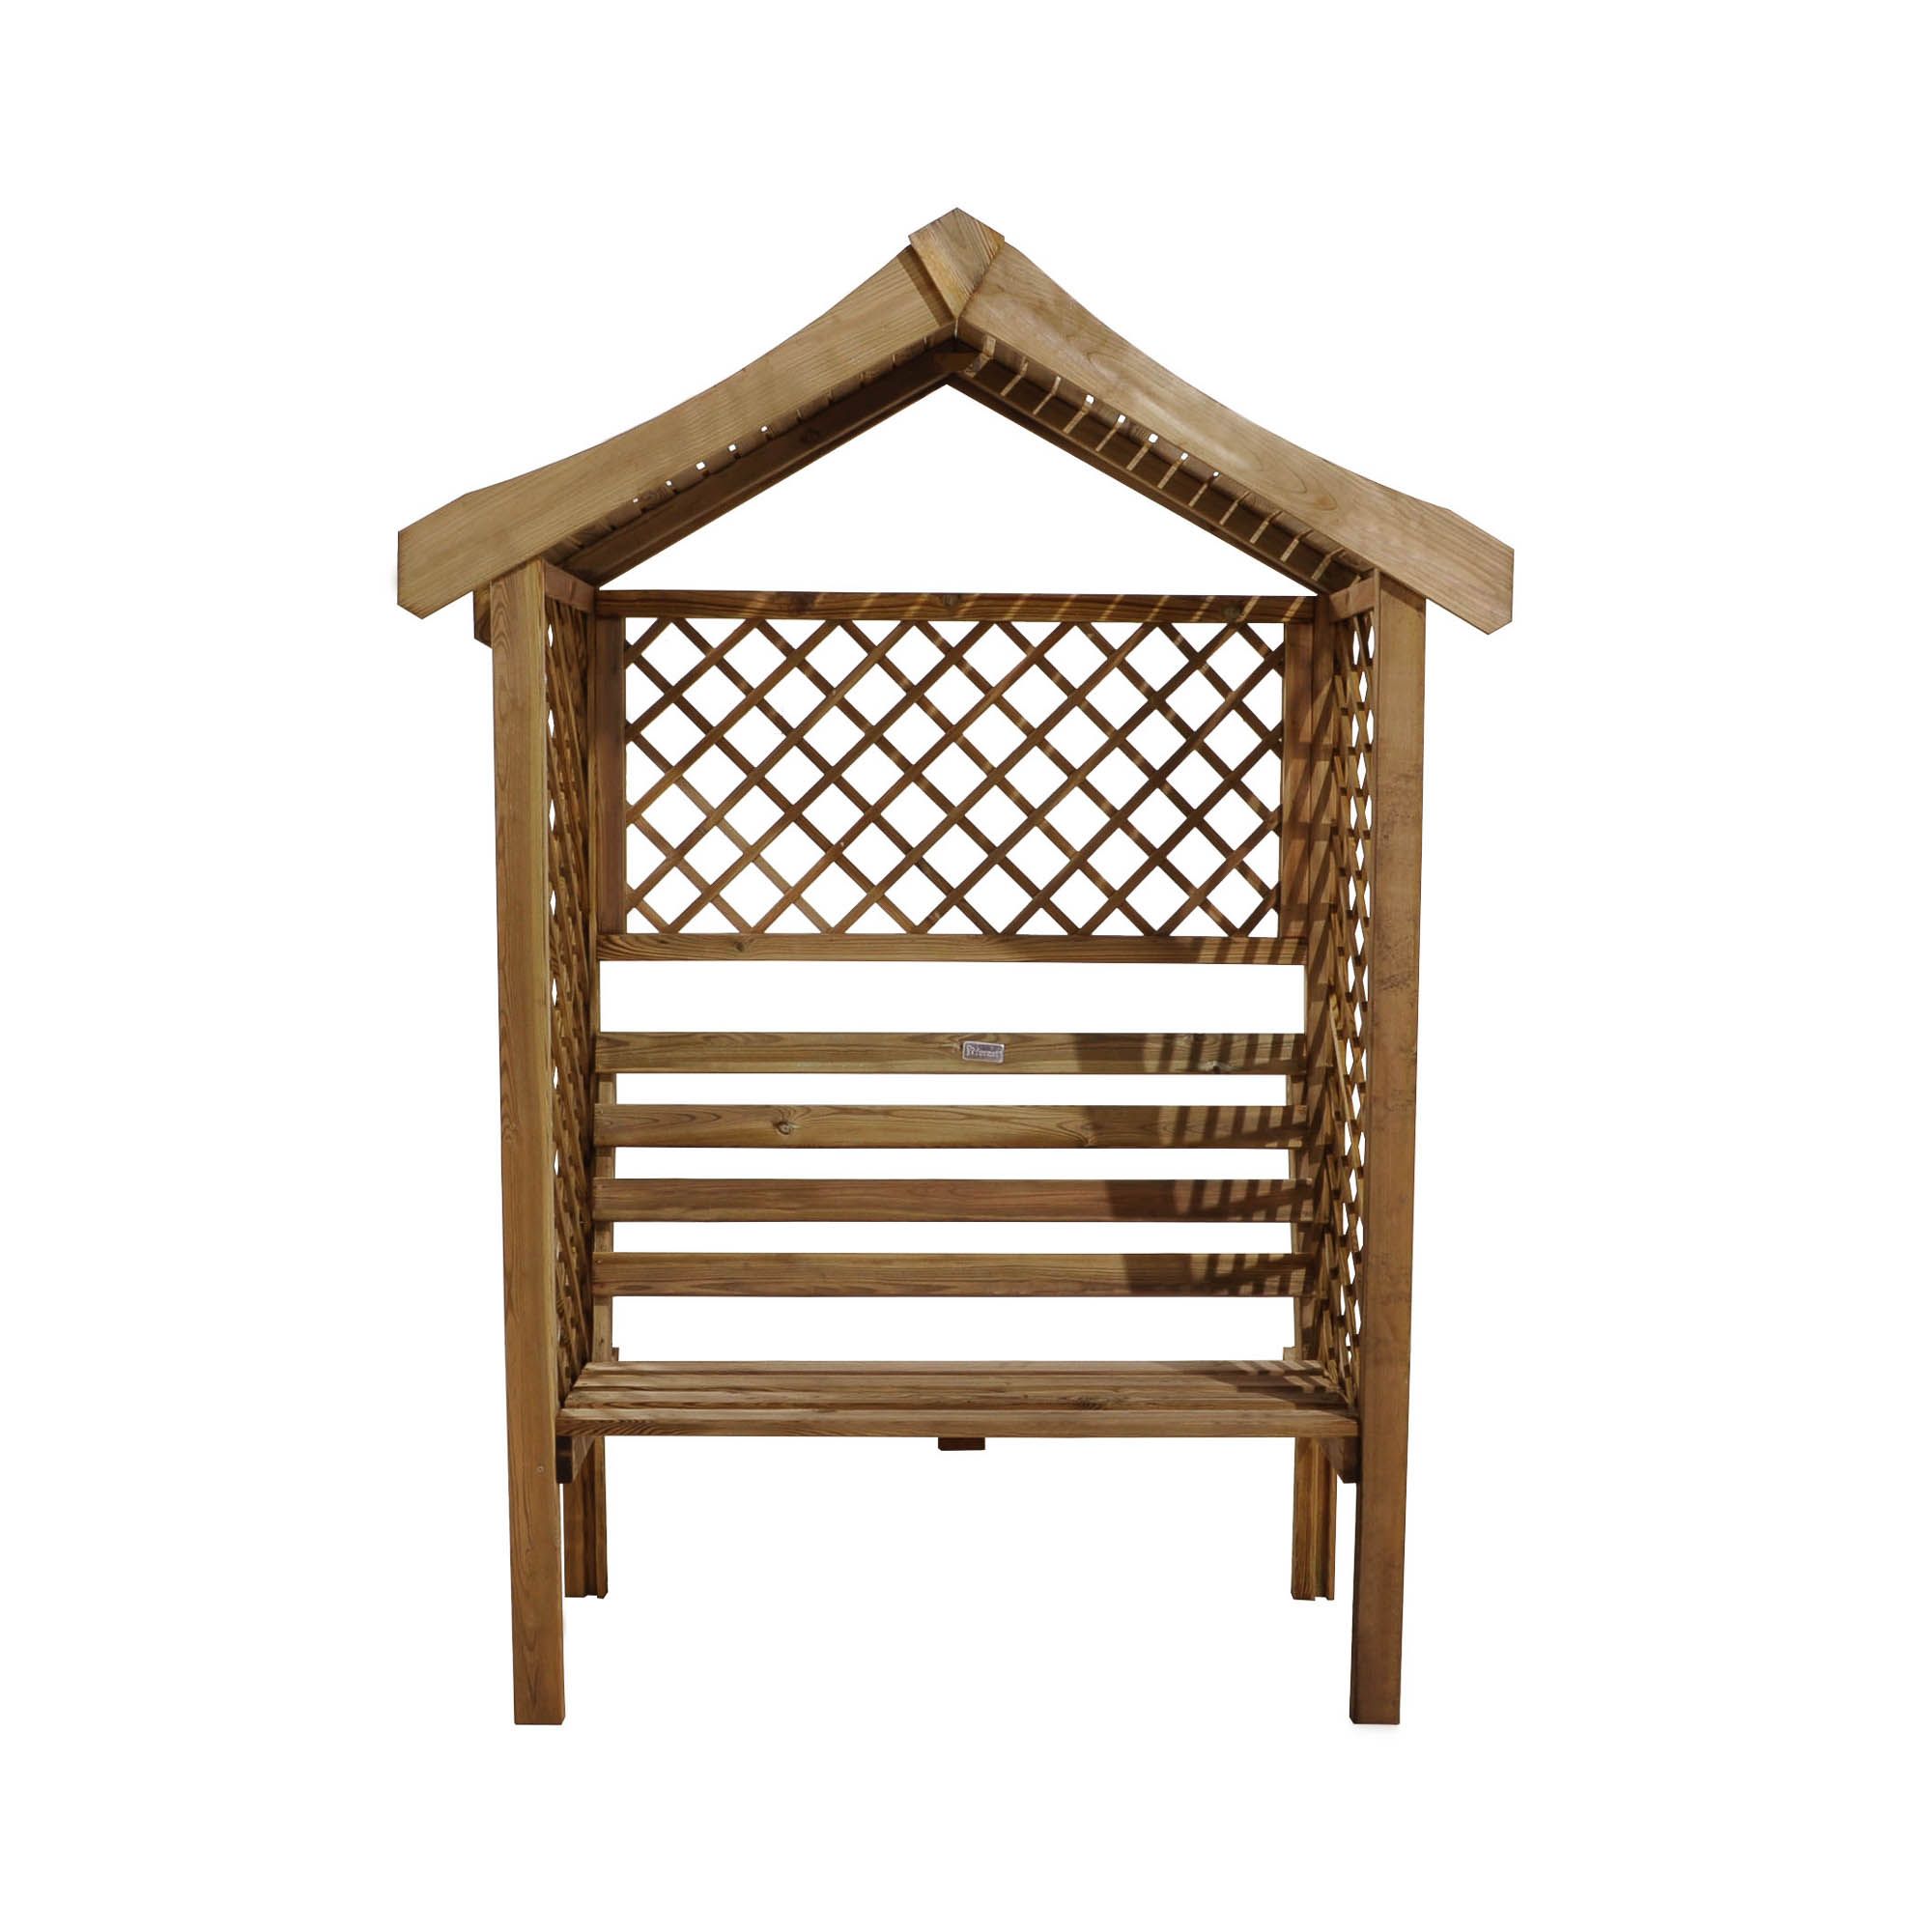 Forest Garden Parisienne Arbour, (H)2120mm (W)1540mm (D)660mm - Assembly required